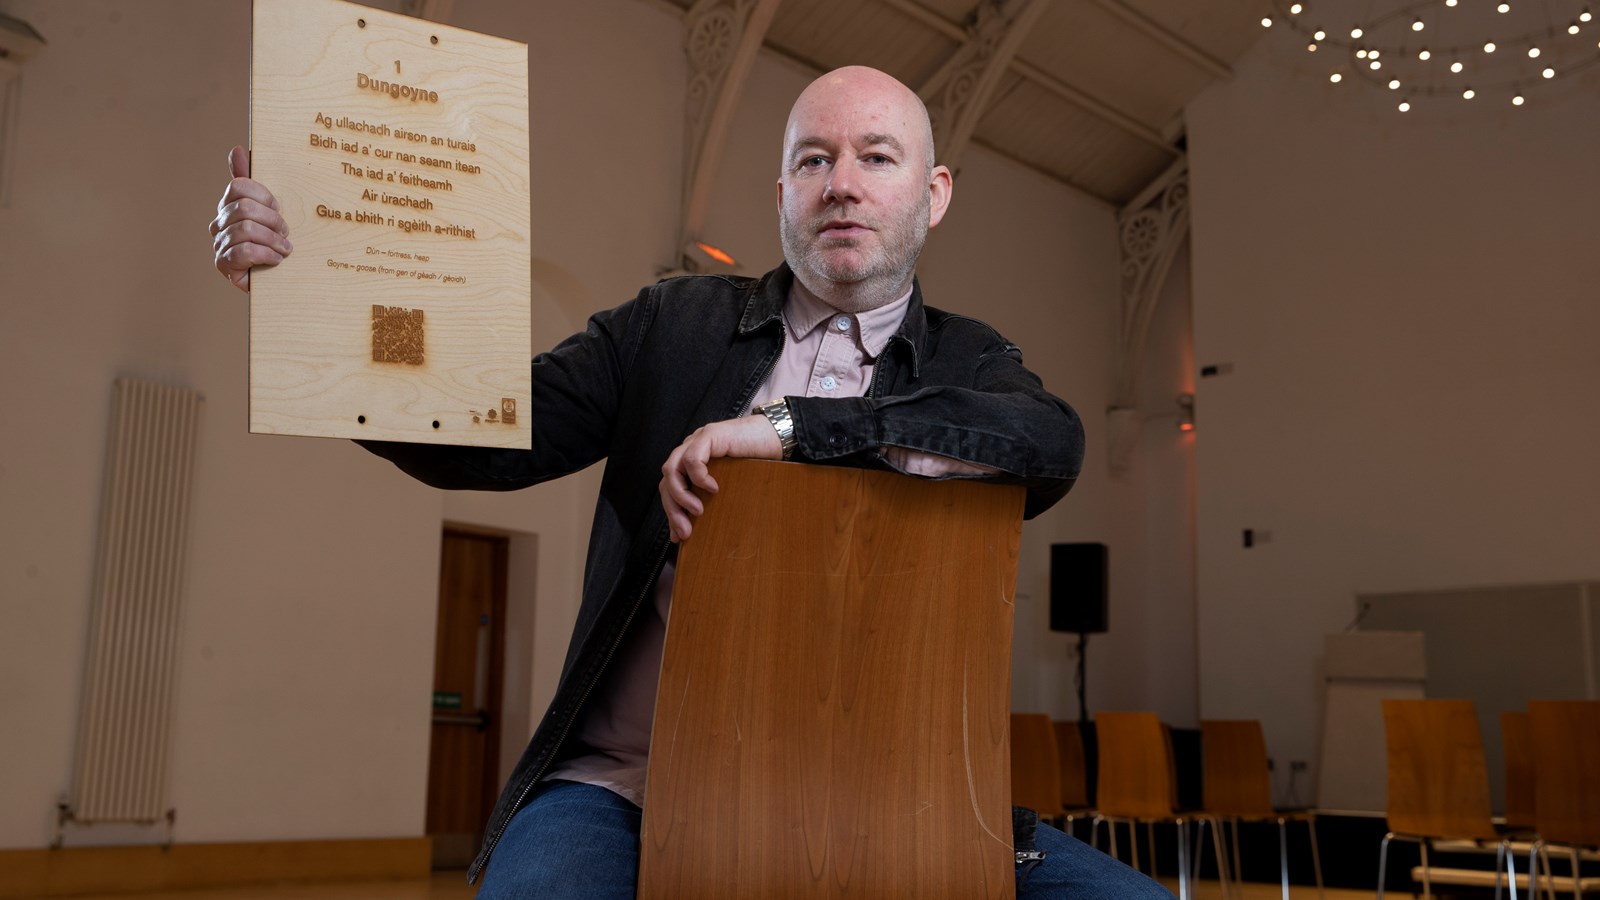 Artist Martin O'Connor poses with a plaque from a Gaelic poetry trail